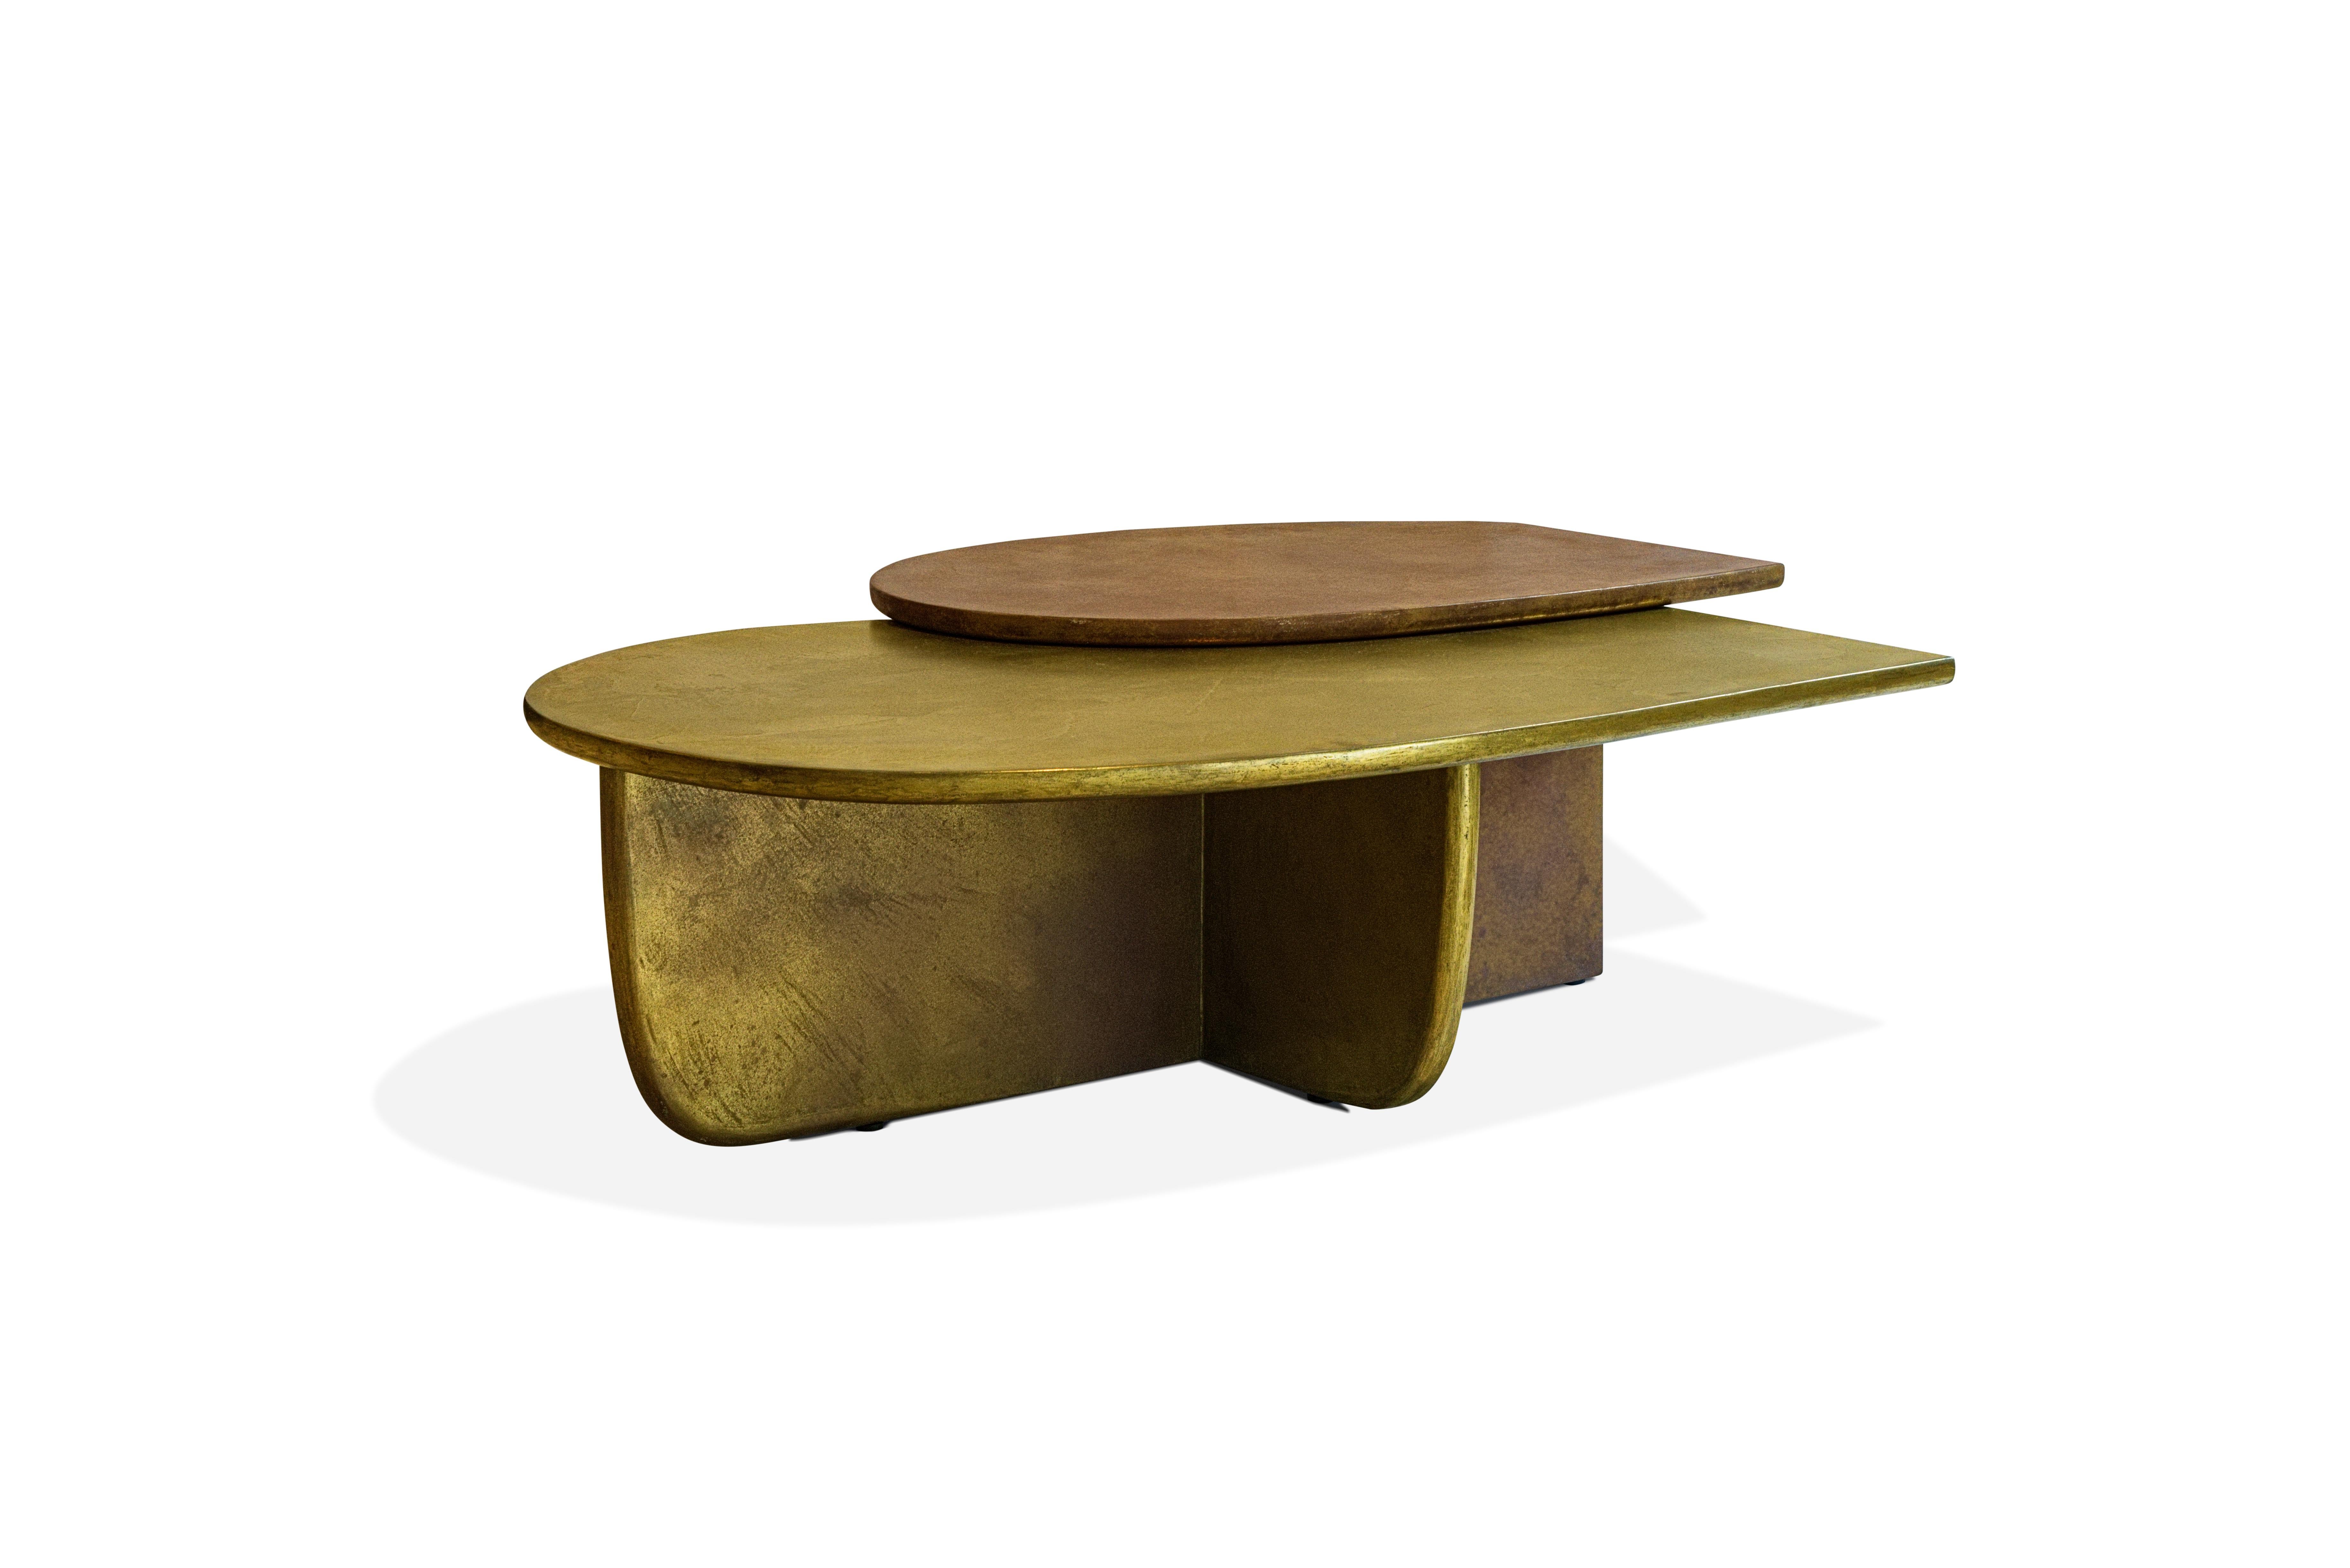 Cibic’s work is defined by his incredible energy that transforms his drawings into vibrant material - such as the Jupiter coffee table designed for Delvis Unlimited. The piece is characterized by a combination of square shapes and sinuous geometric